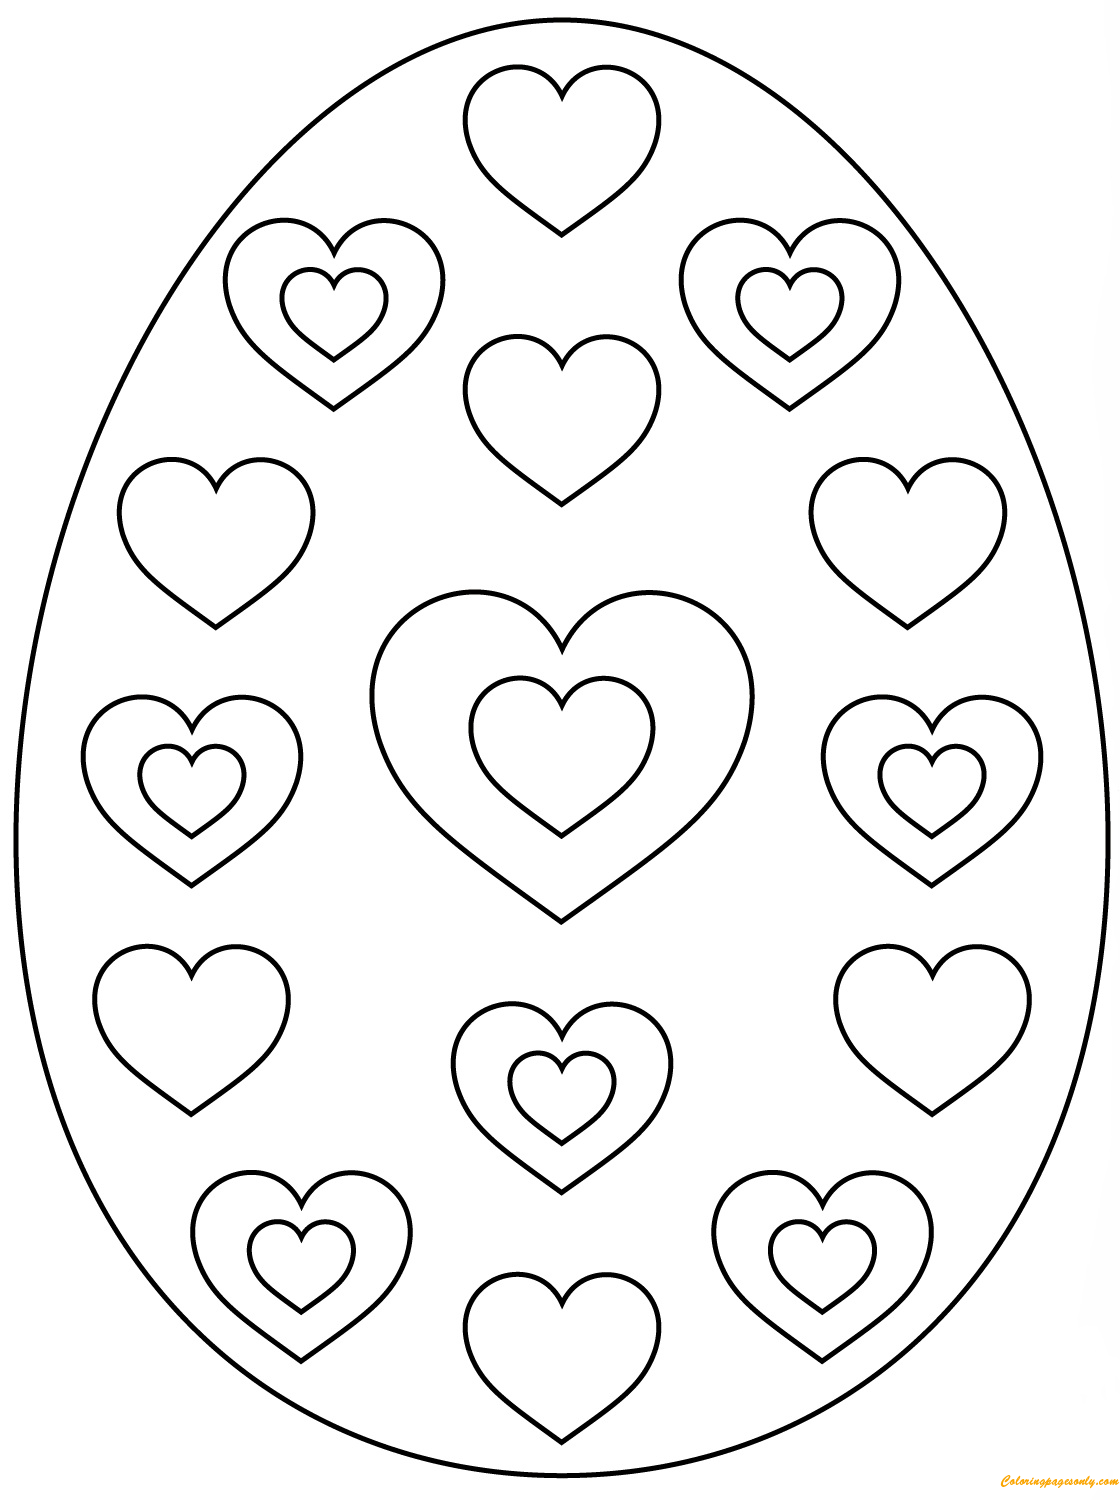 Download Easter Egg Hearts Pattern Coloring Page - Free Coloring ...